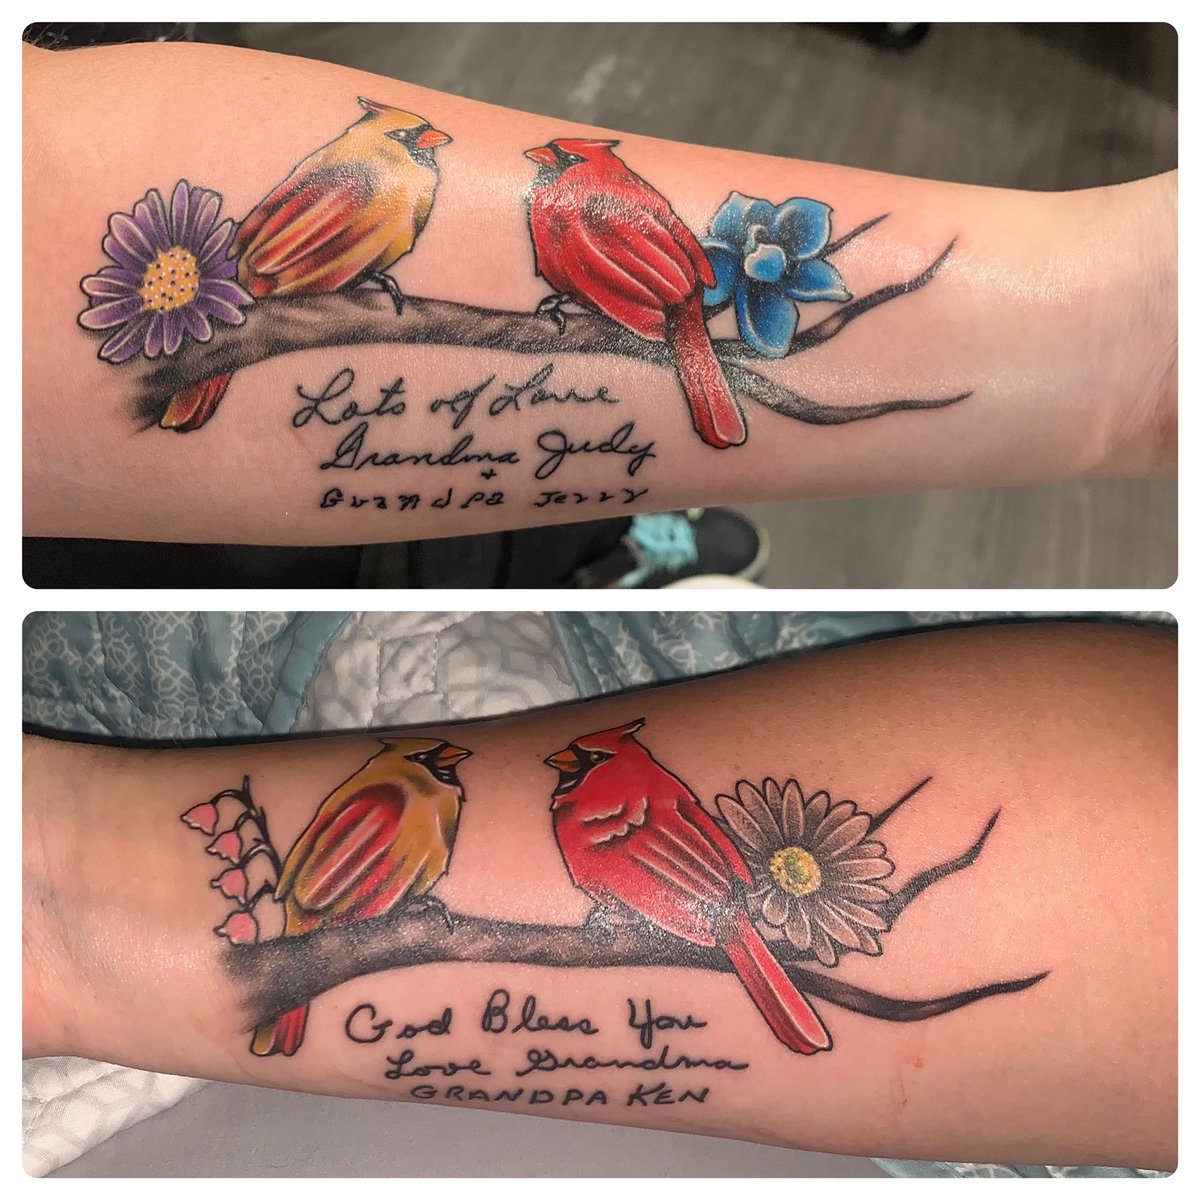 My tattoos are finished… my grandparents handwriting, birth flowers and favorite birds  ❤️❤️❤️❤️  #grandparentlove